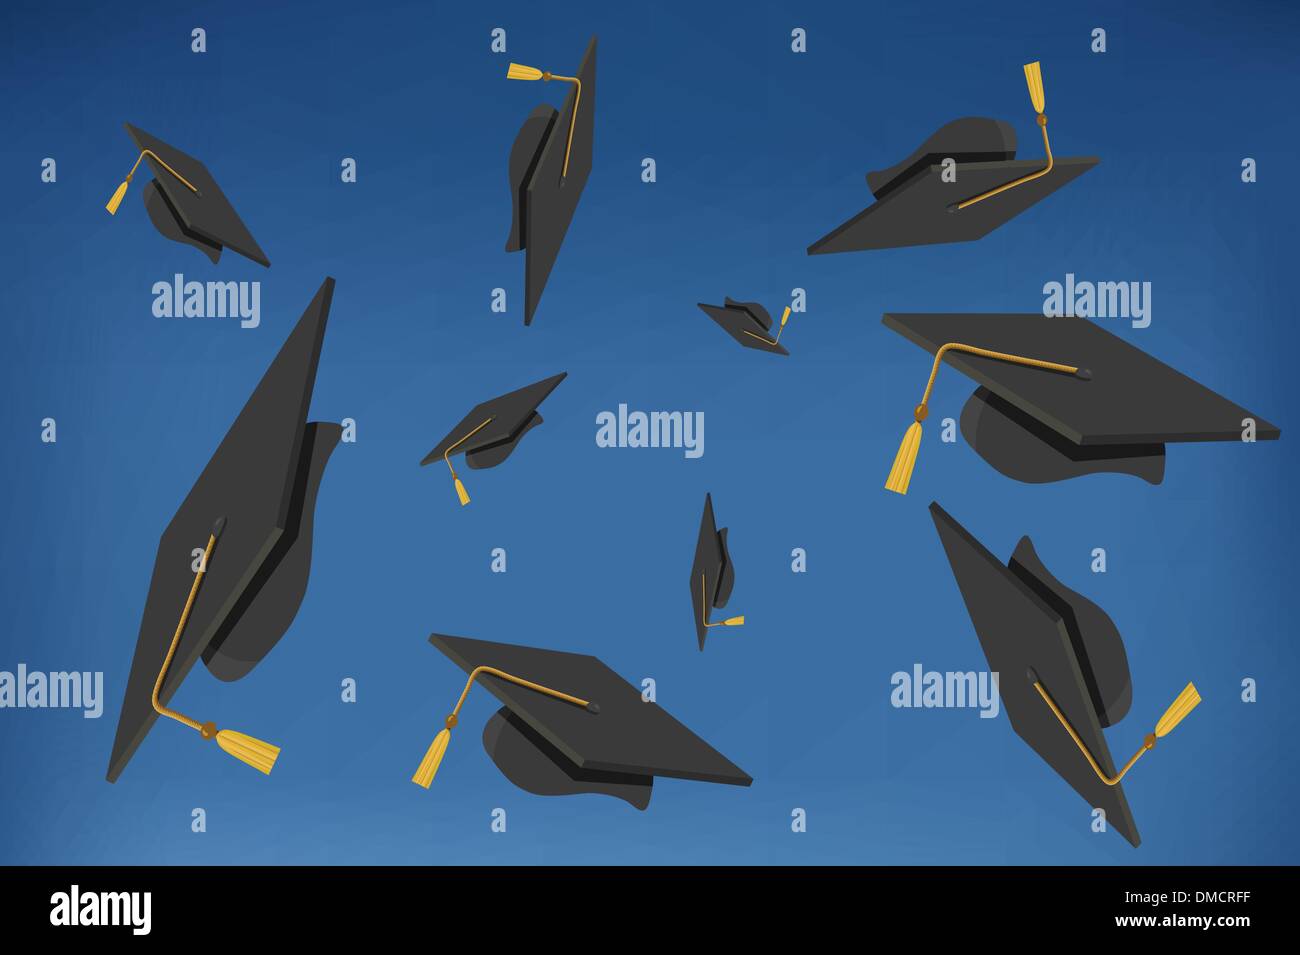 Graduation Caps Thrown in the Air Stock Vector